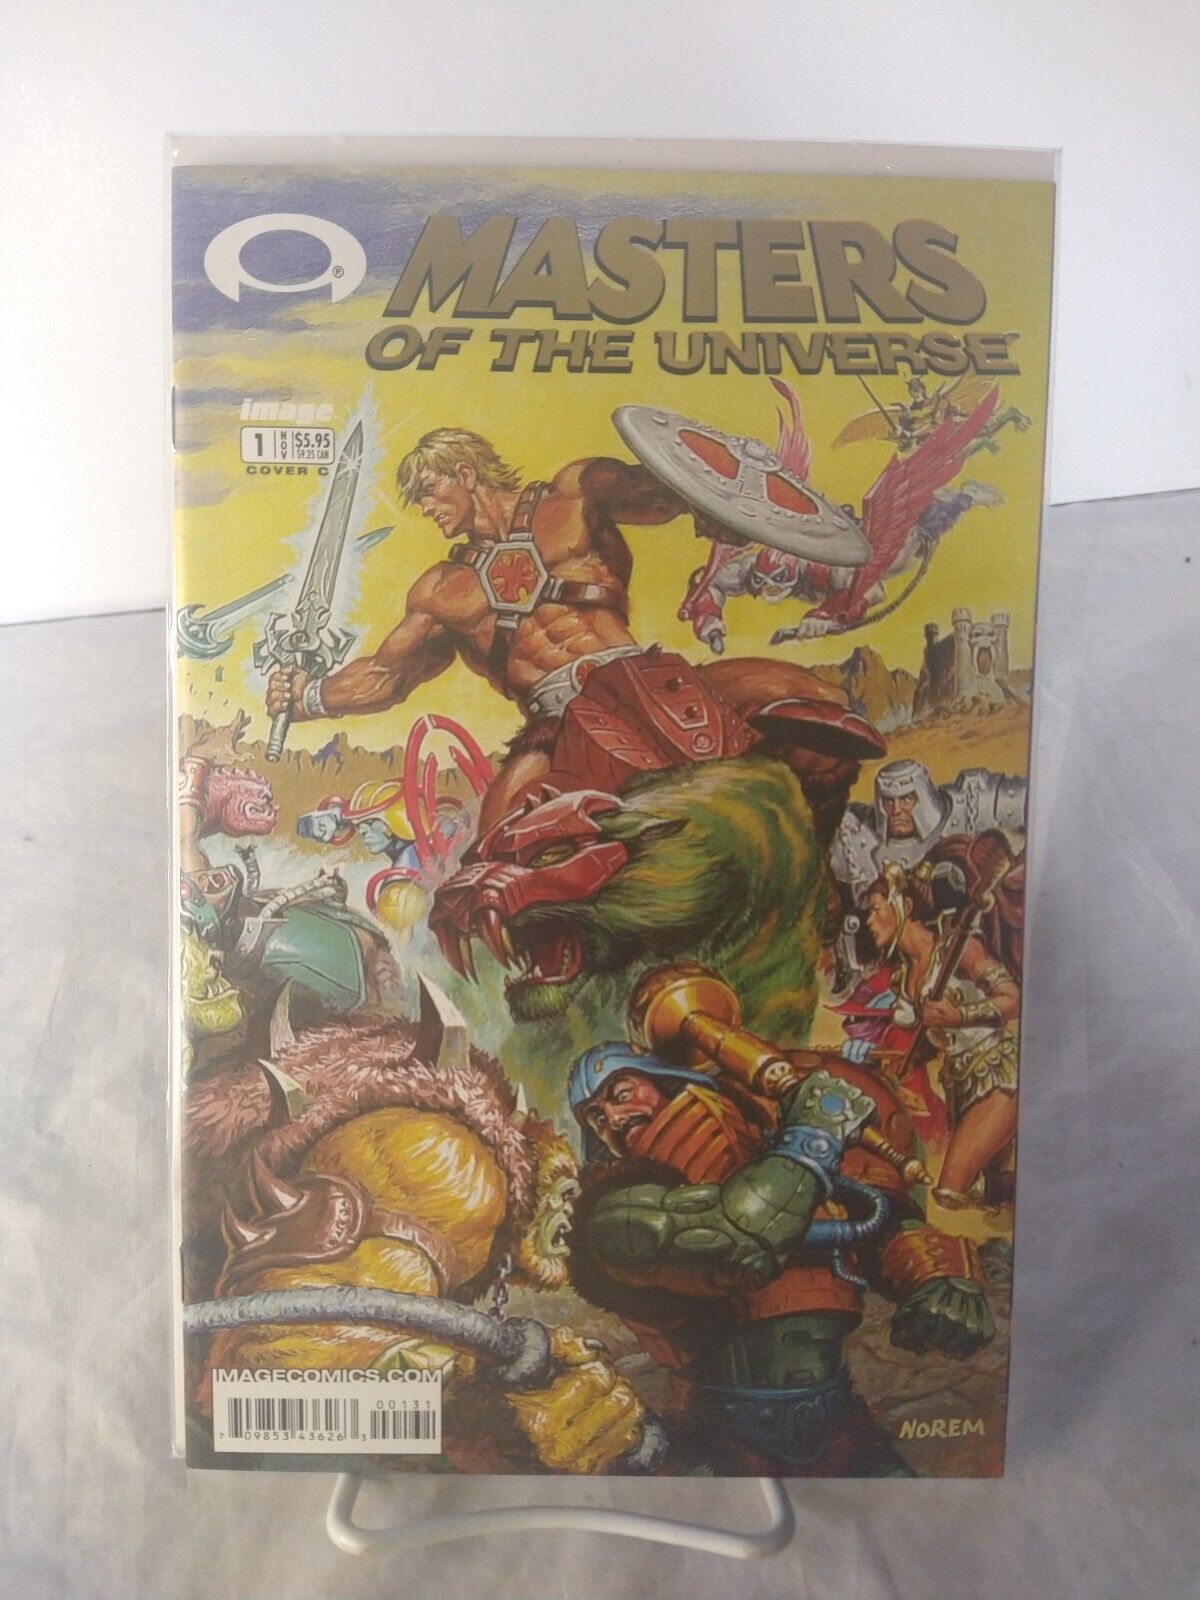 Masters of the Universe (2002) #1 Earl Norem Cover VF+.